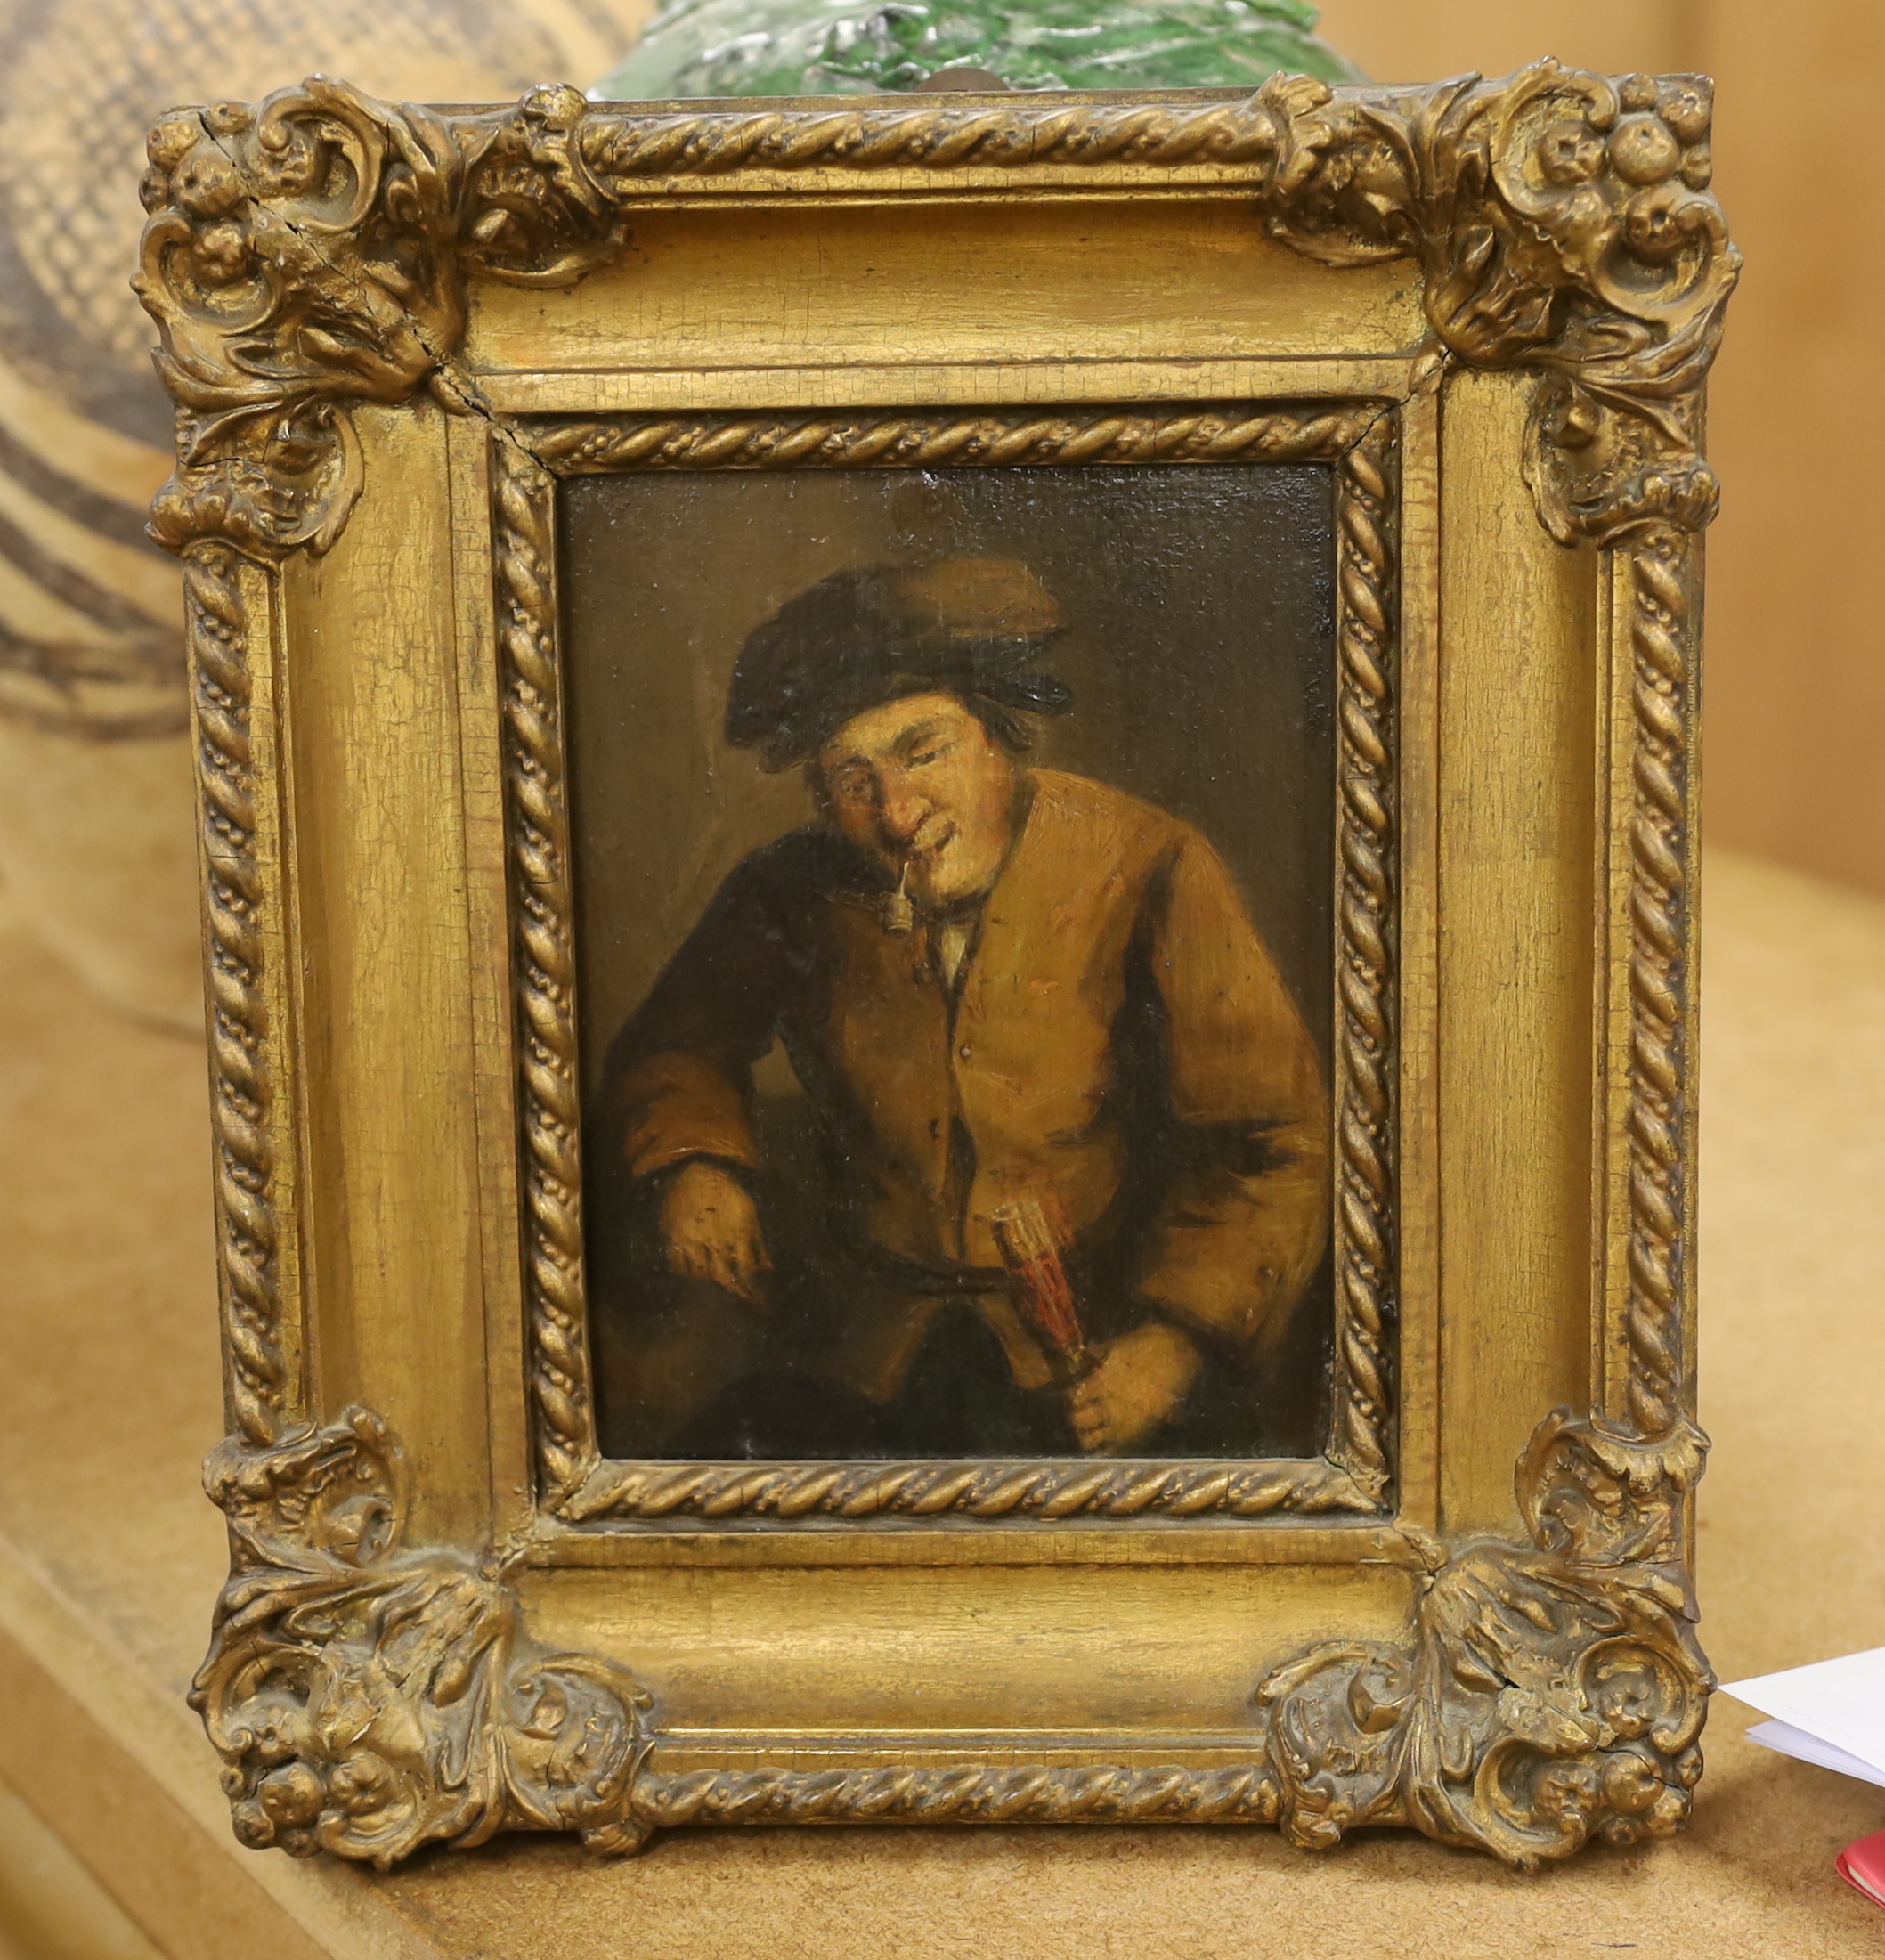 19th century Dutch School, oil on panel, Study of a pipe smoker, unsigned, 17 x 13cm, ornate gilt framed